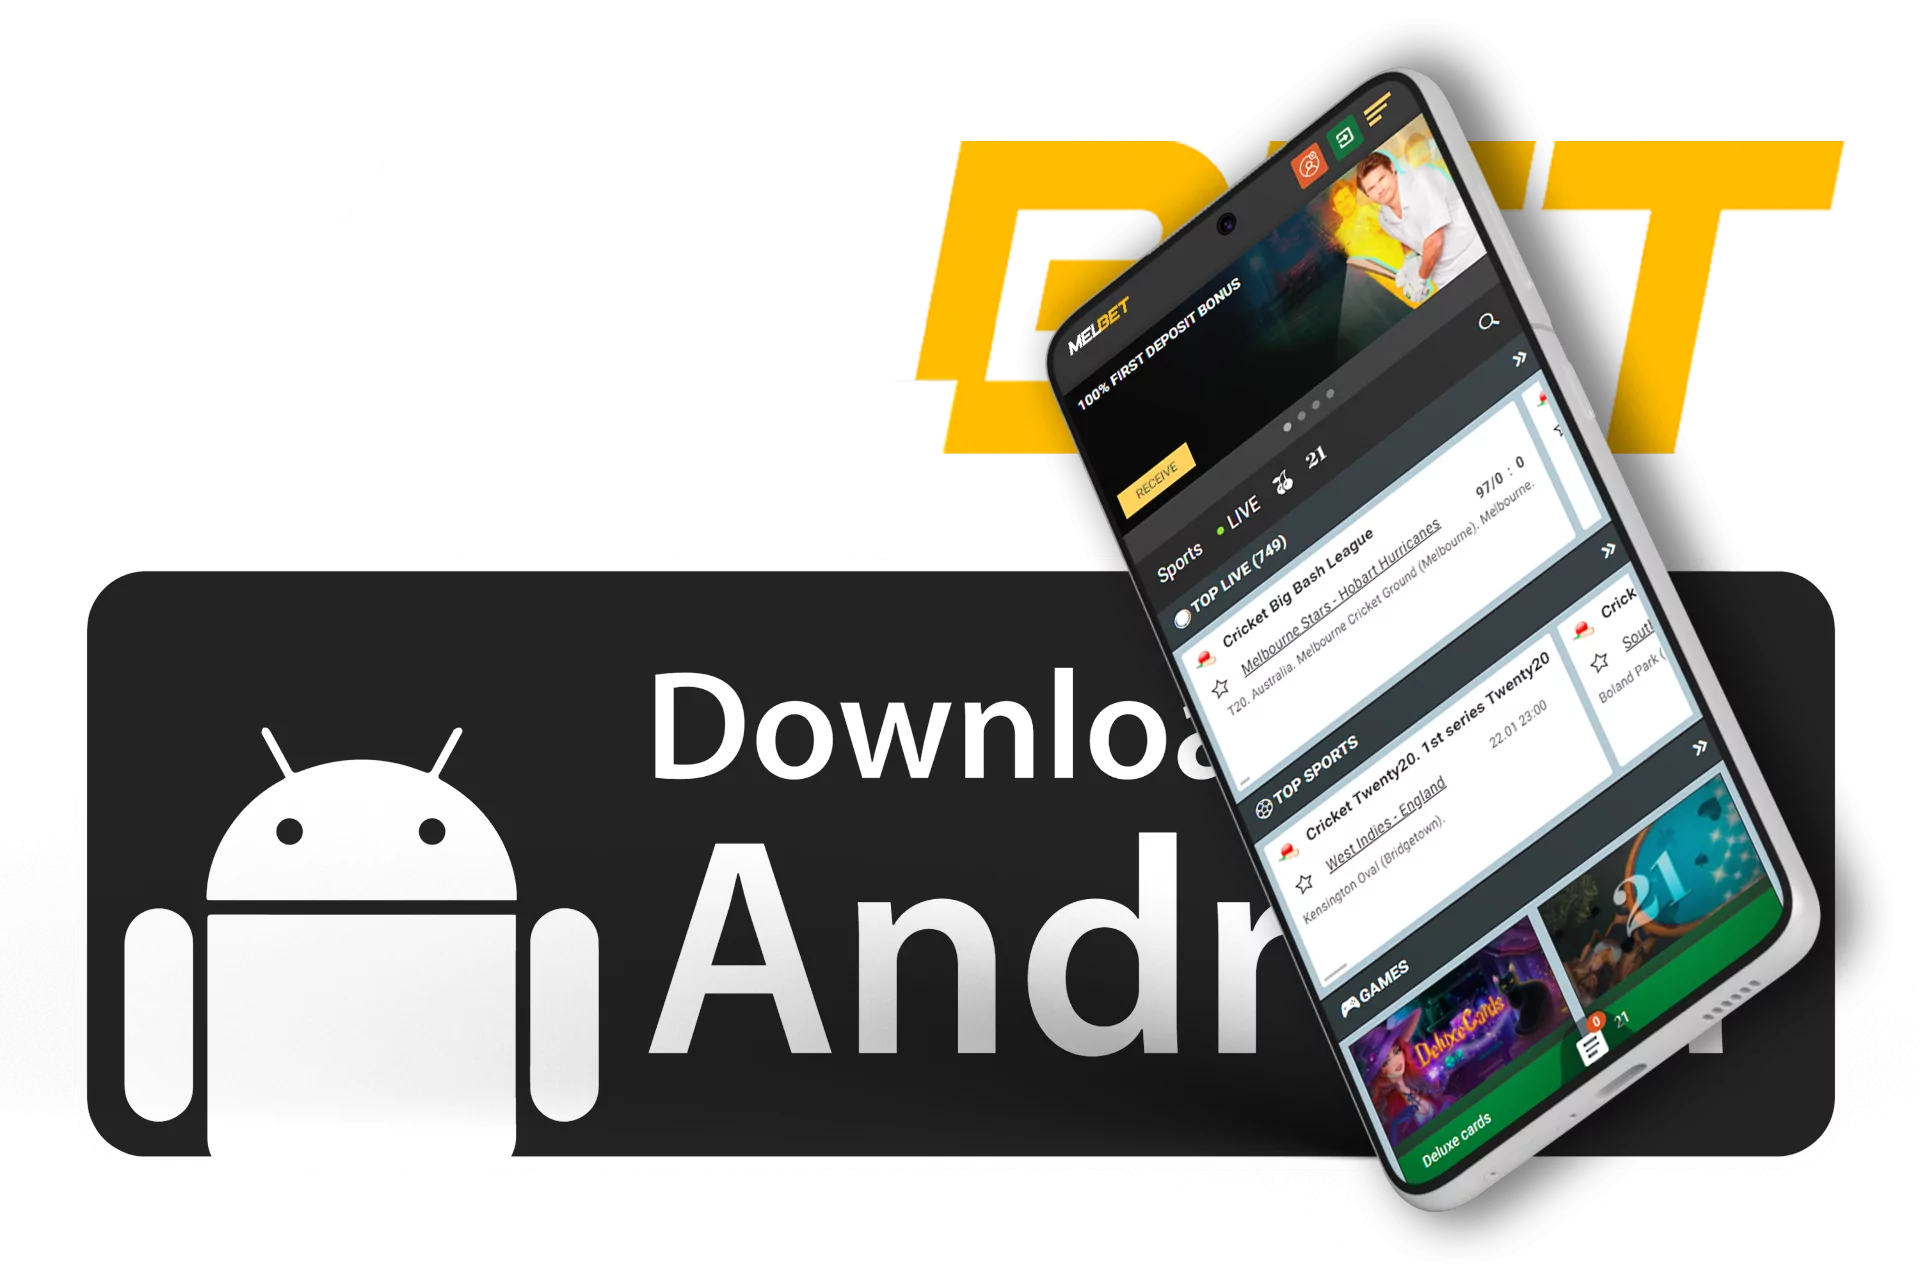 For Android devices, there is a great app of Melbet.